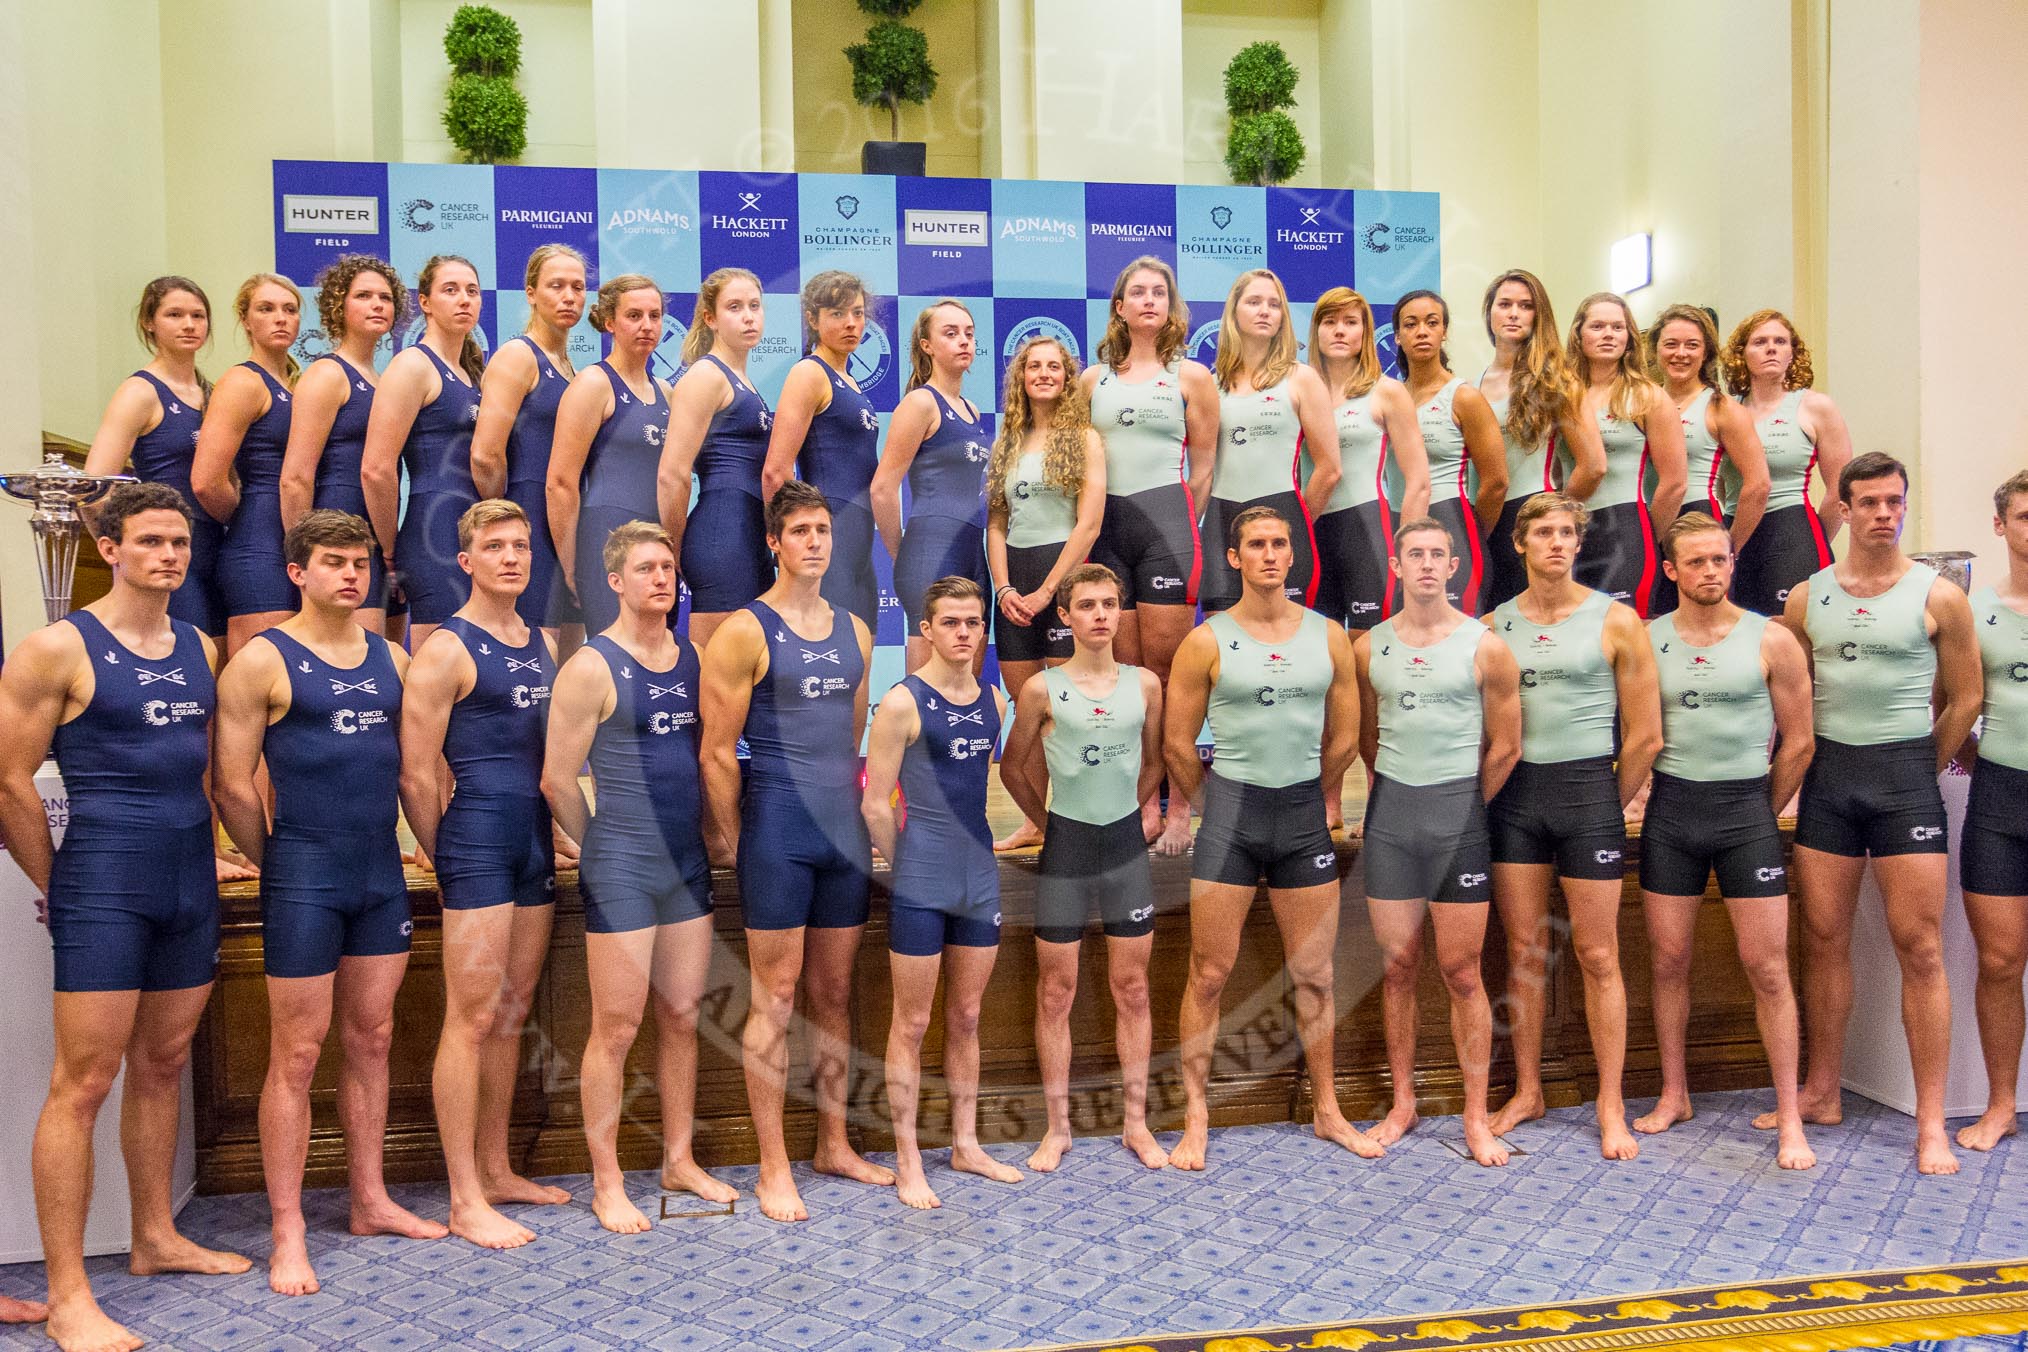 The Boat Race season 2016 - Crew Announcement and Weigh-In: The Cancer Research Boat Races Crew Announcement group photos - the Oxford women and men on the left, Cambridge on the right.
Westmister Hall, Westminster,
London SW11,

United Kingdom,
on 01 March 2016 at 10:31, image #87